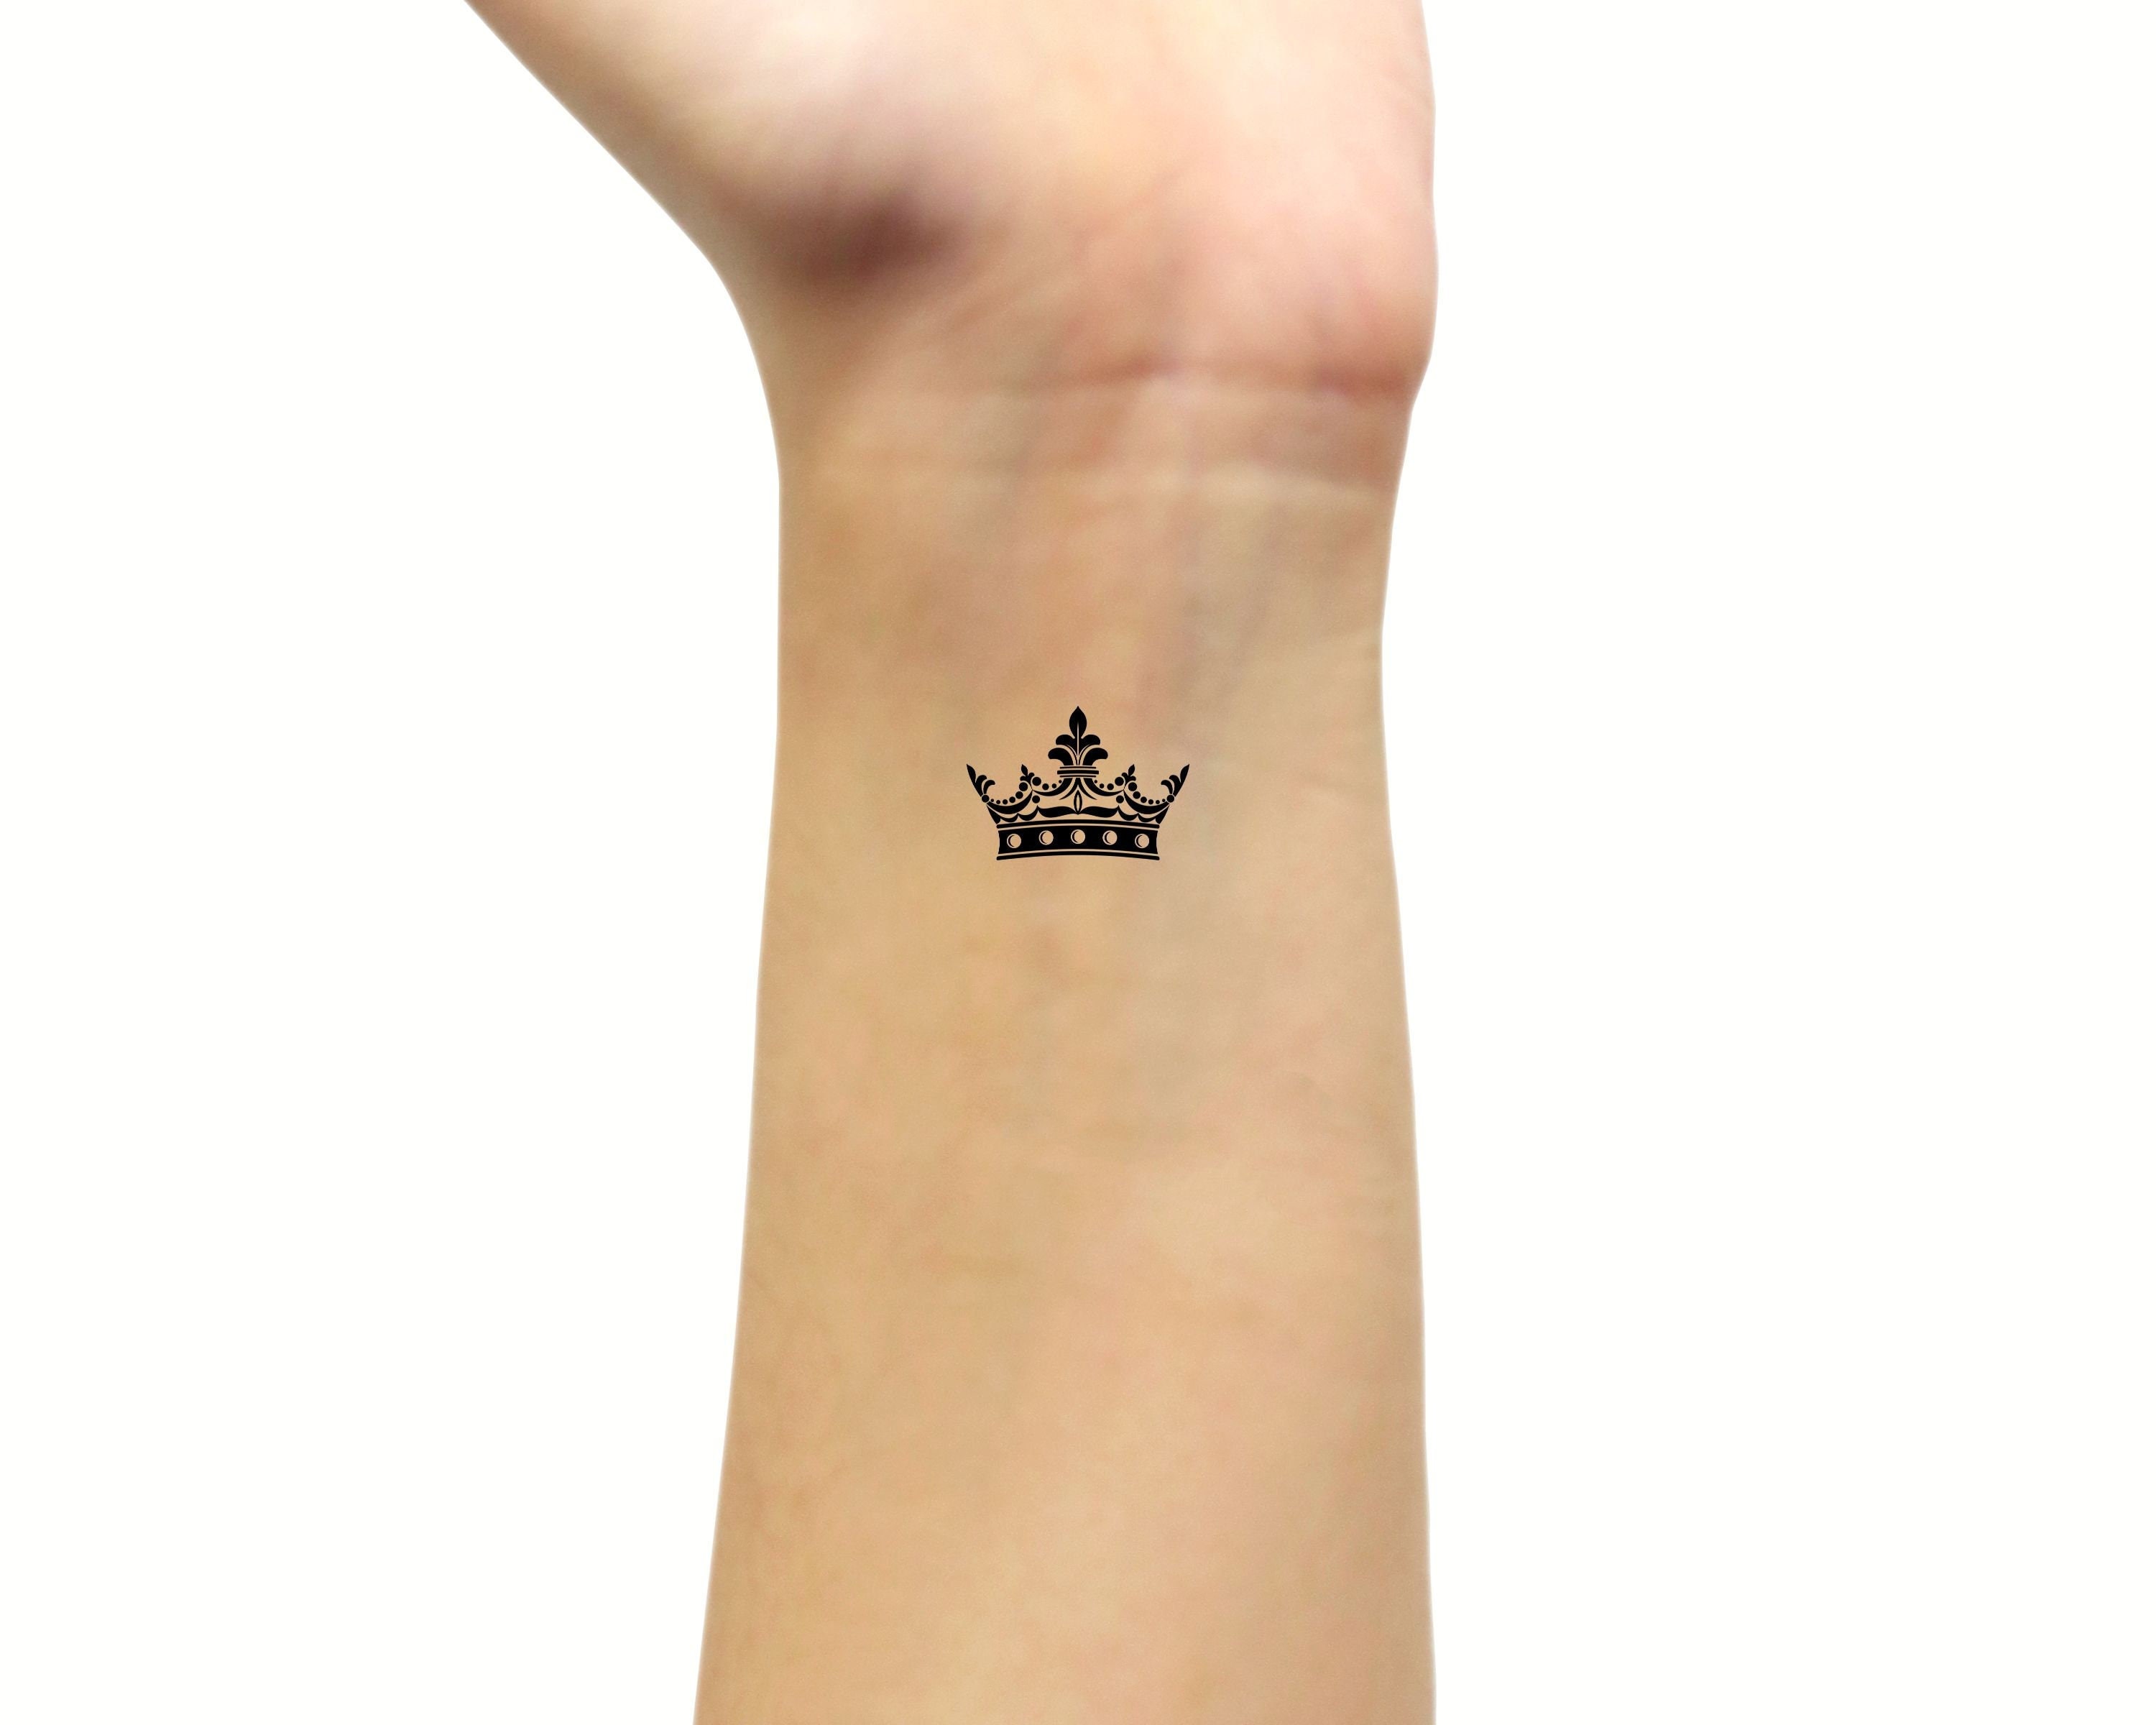 Meaning Behind the Queen of Hearts Tattoo - wide 3